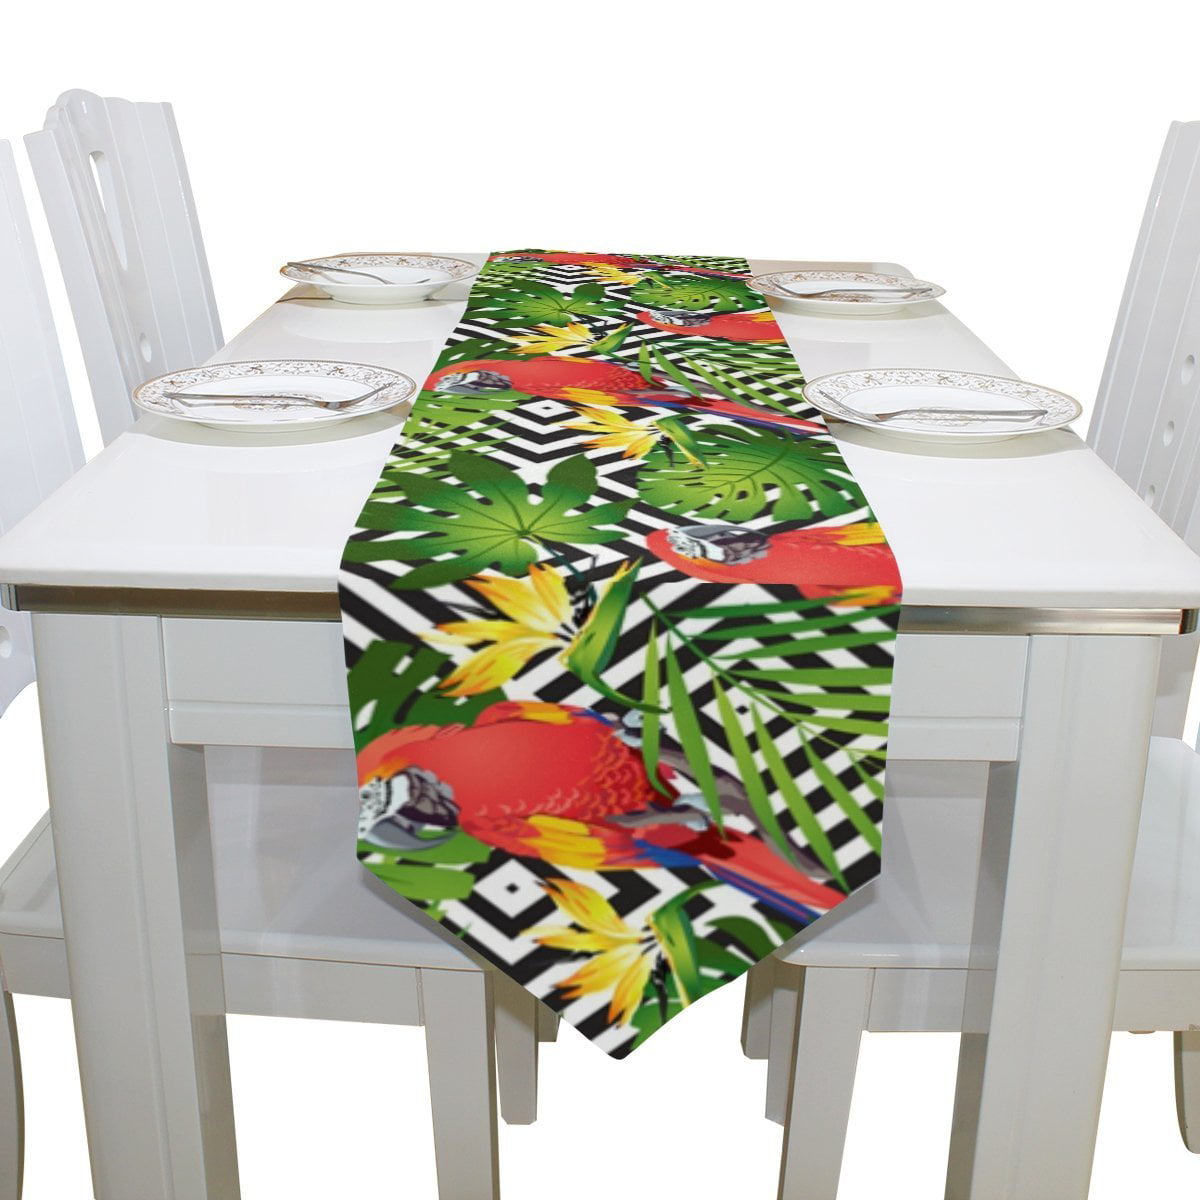 Double-Sided Table Runner Tropical Colorful Animal Zebra Stripe Table Cloth Runners for Wedding Holiday Party Kitchen Dining Home Decor,13x70 Inches Long